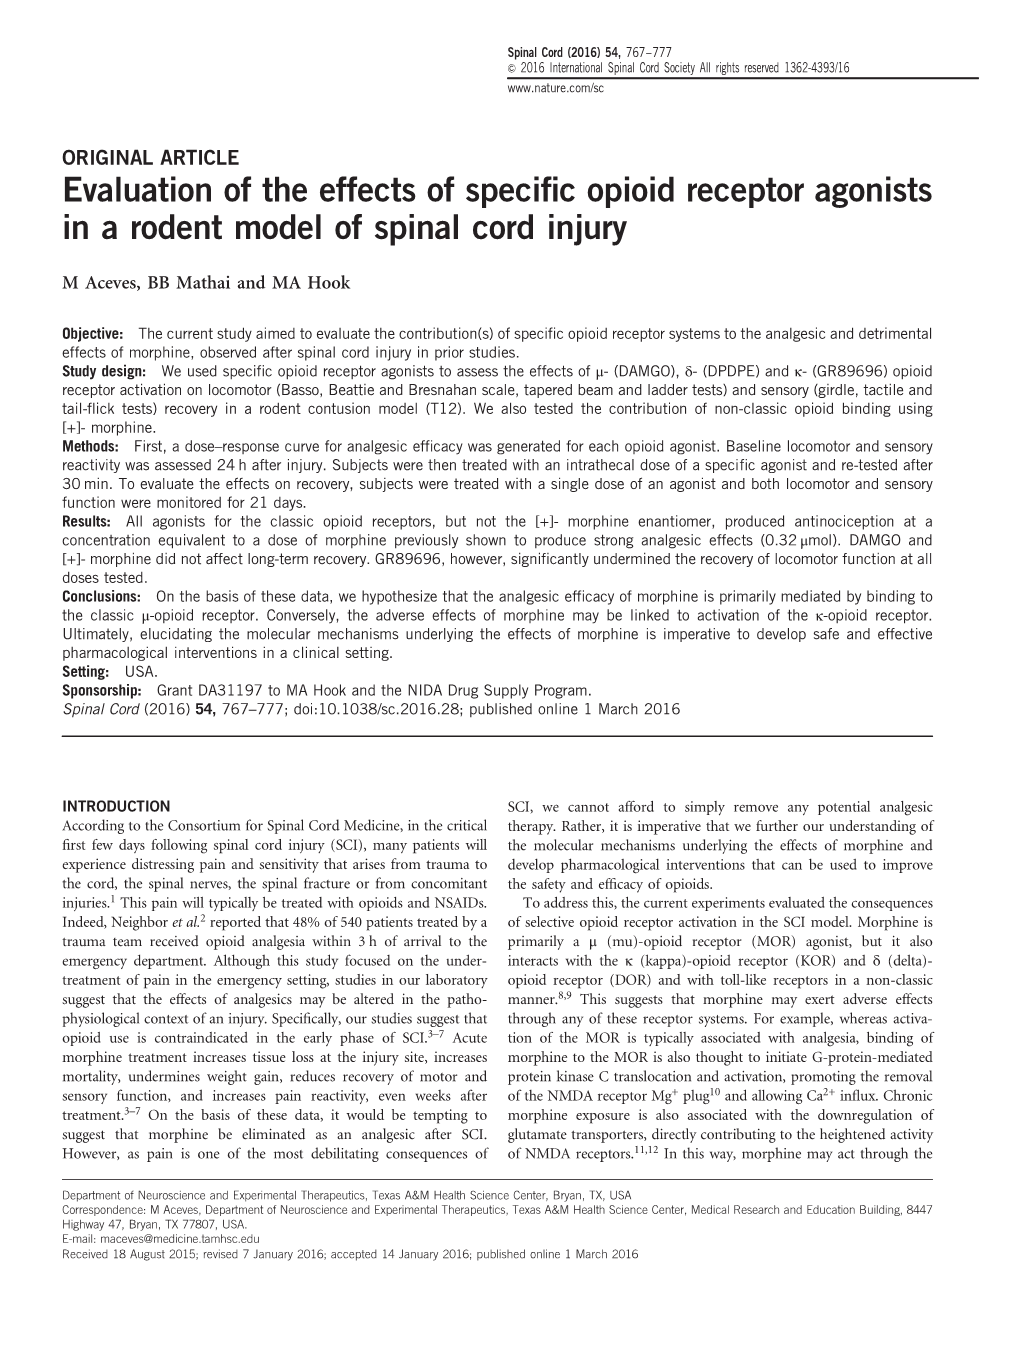 Evaluation of the Effects of Specific Opioid Receptor Agonists in a Rodent